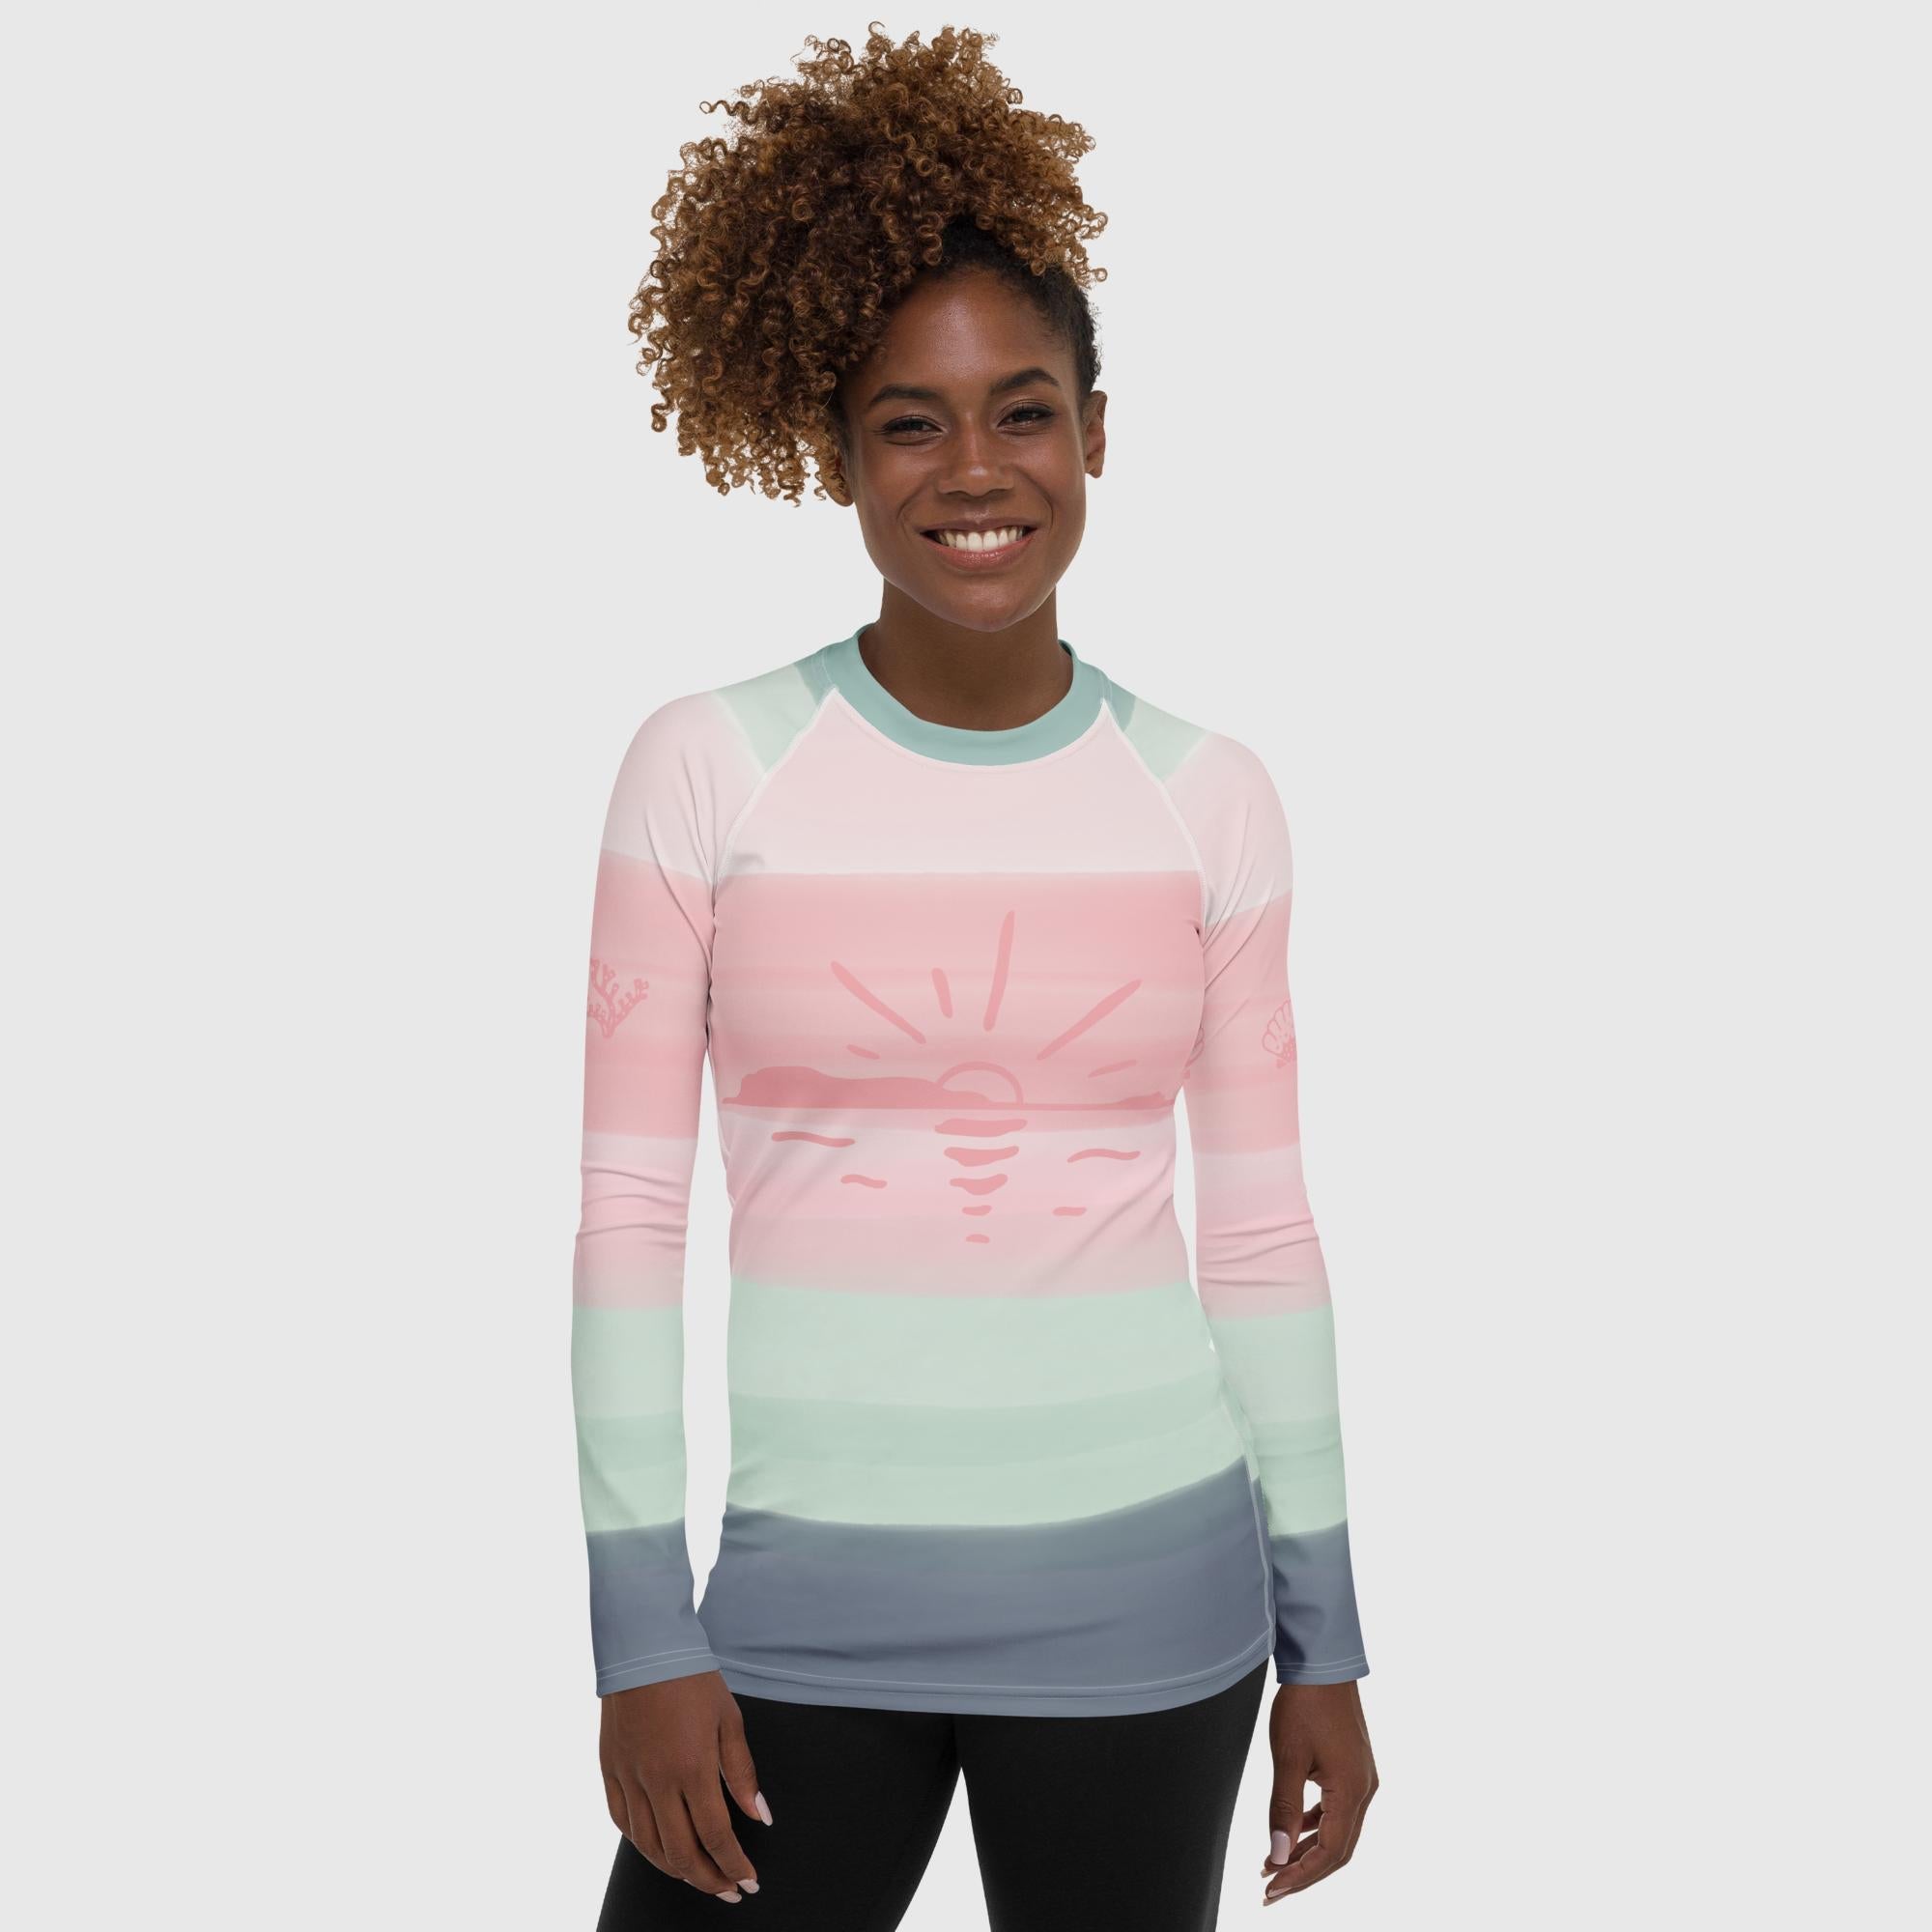 Women's Rash Guard Striped - Revive Wear     Women's Striped Rash Guard. This rainbow-striped rash guard keeps the sun off your skin during long days of paddling, swimming or beachcombing. Shop your size today.